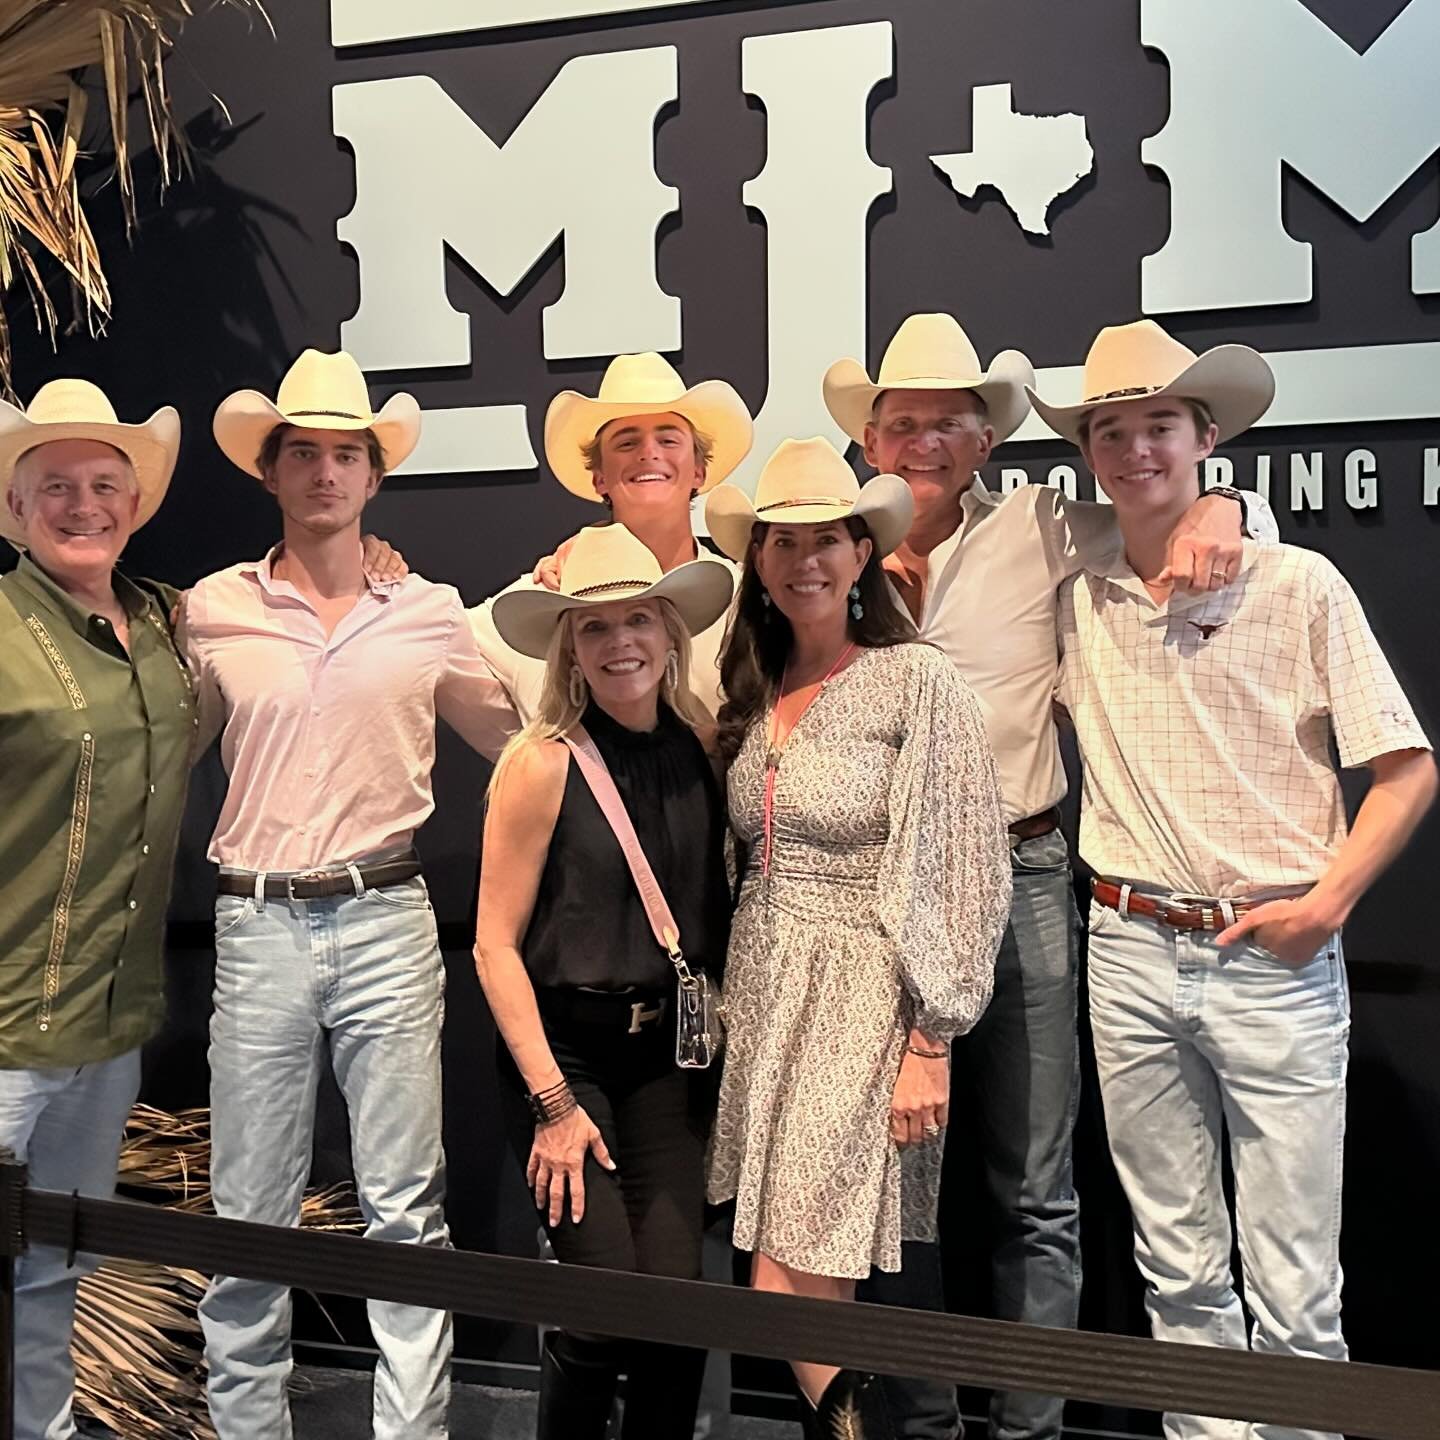 We had a blast attending the 2024 Mack, Jack &amp; McConaughey Gala here in Austin! MJ&amp;M is the annual joint fundraising effort of Academy Award-winning actor Matthew McConaughey, ACM Award-winning artist Jack Ingram, and coaching legend Mack Bro